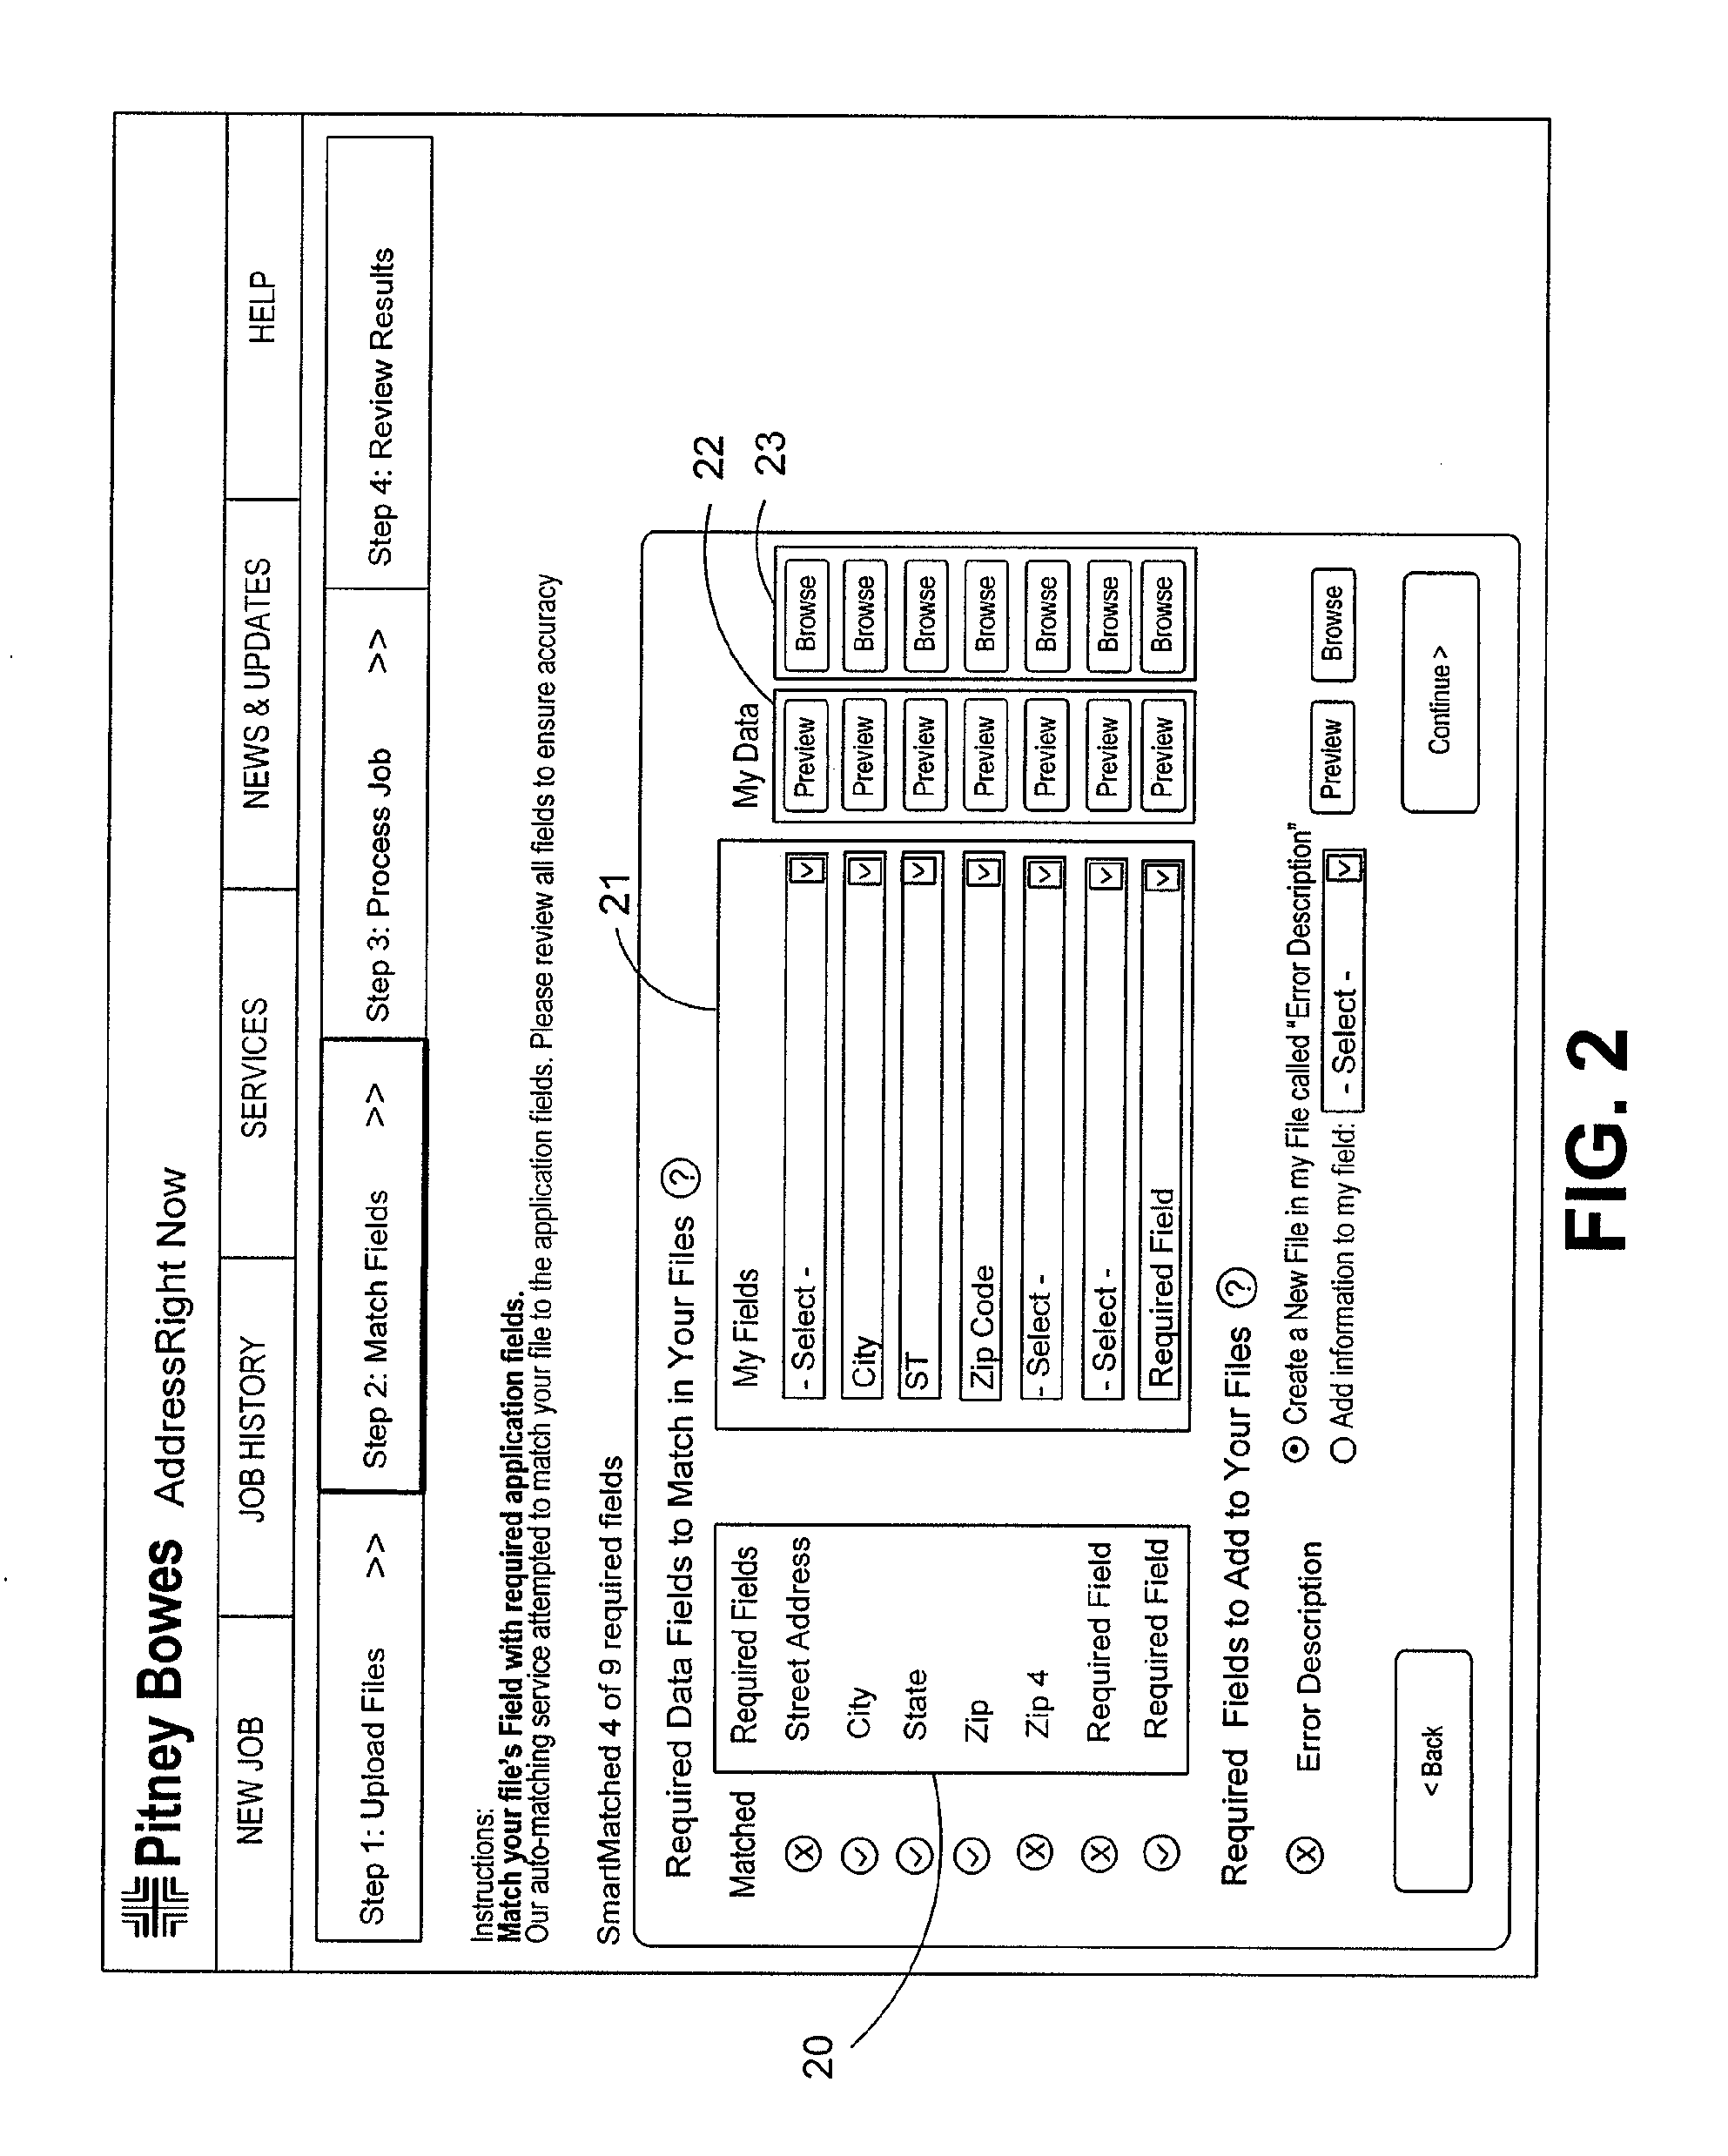 System and method for identifying data fields for remote address cleansing